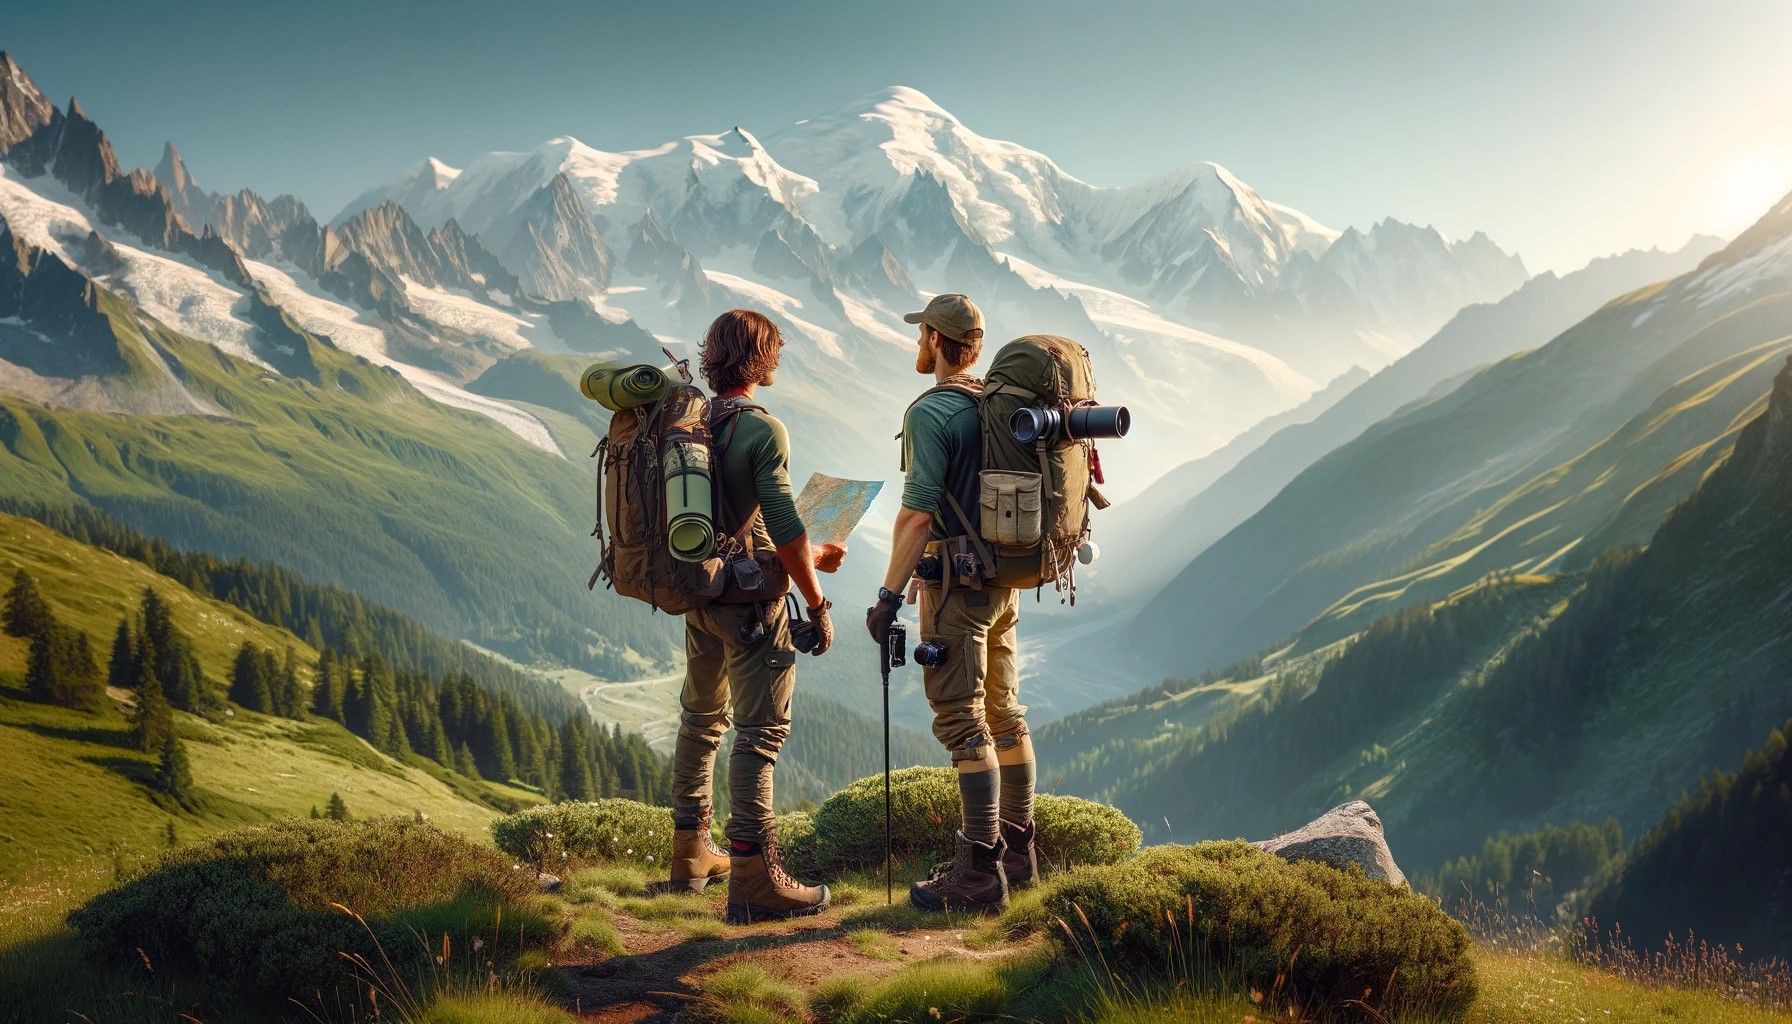 A serene landscape of the French Alps with Mont Blanc in the background. In the foreground, a male and female hiker are standing side by side, looking